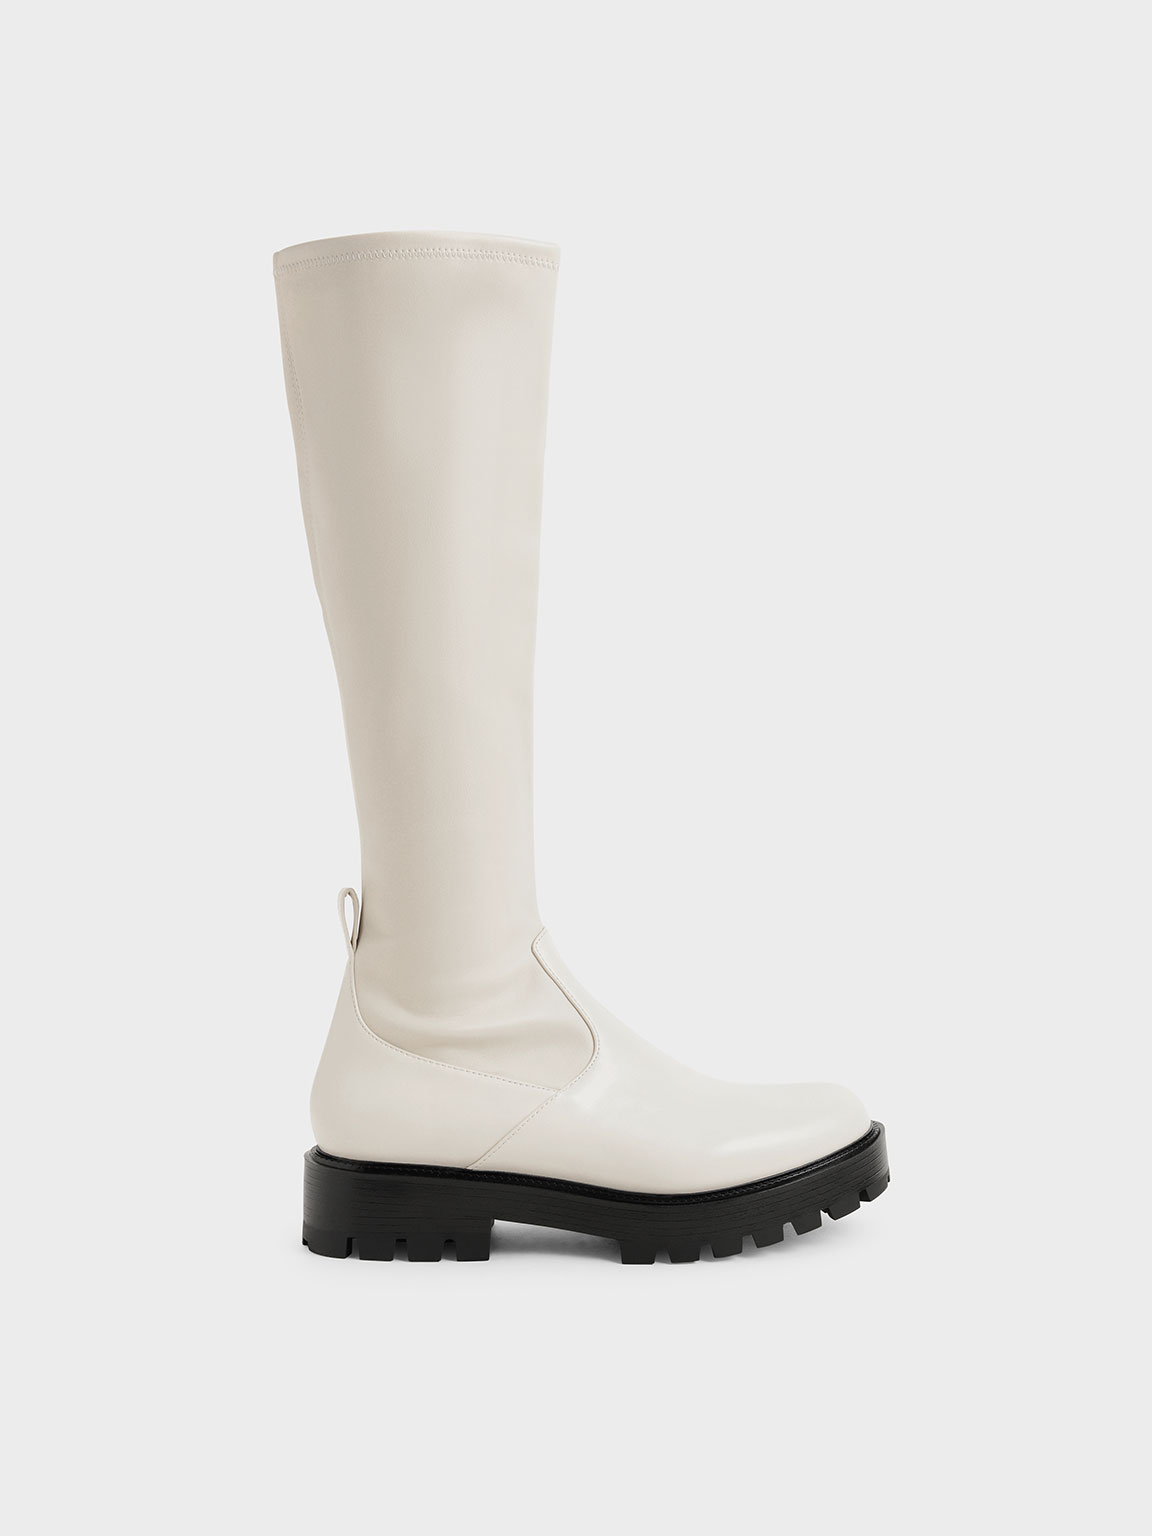 Chalk Knee-High Boots - CHARLES & KEITH US